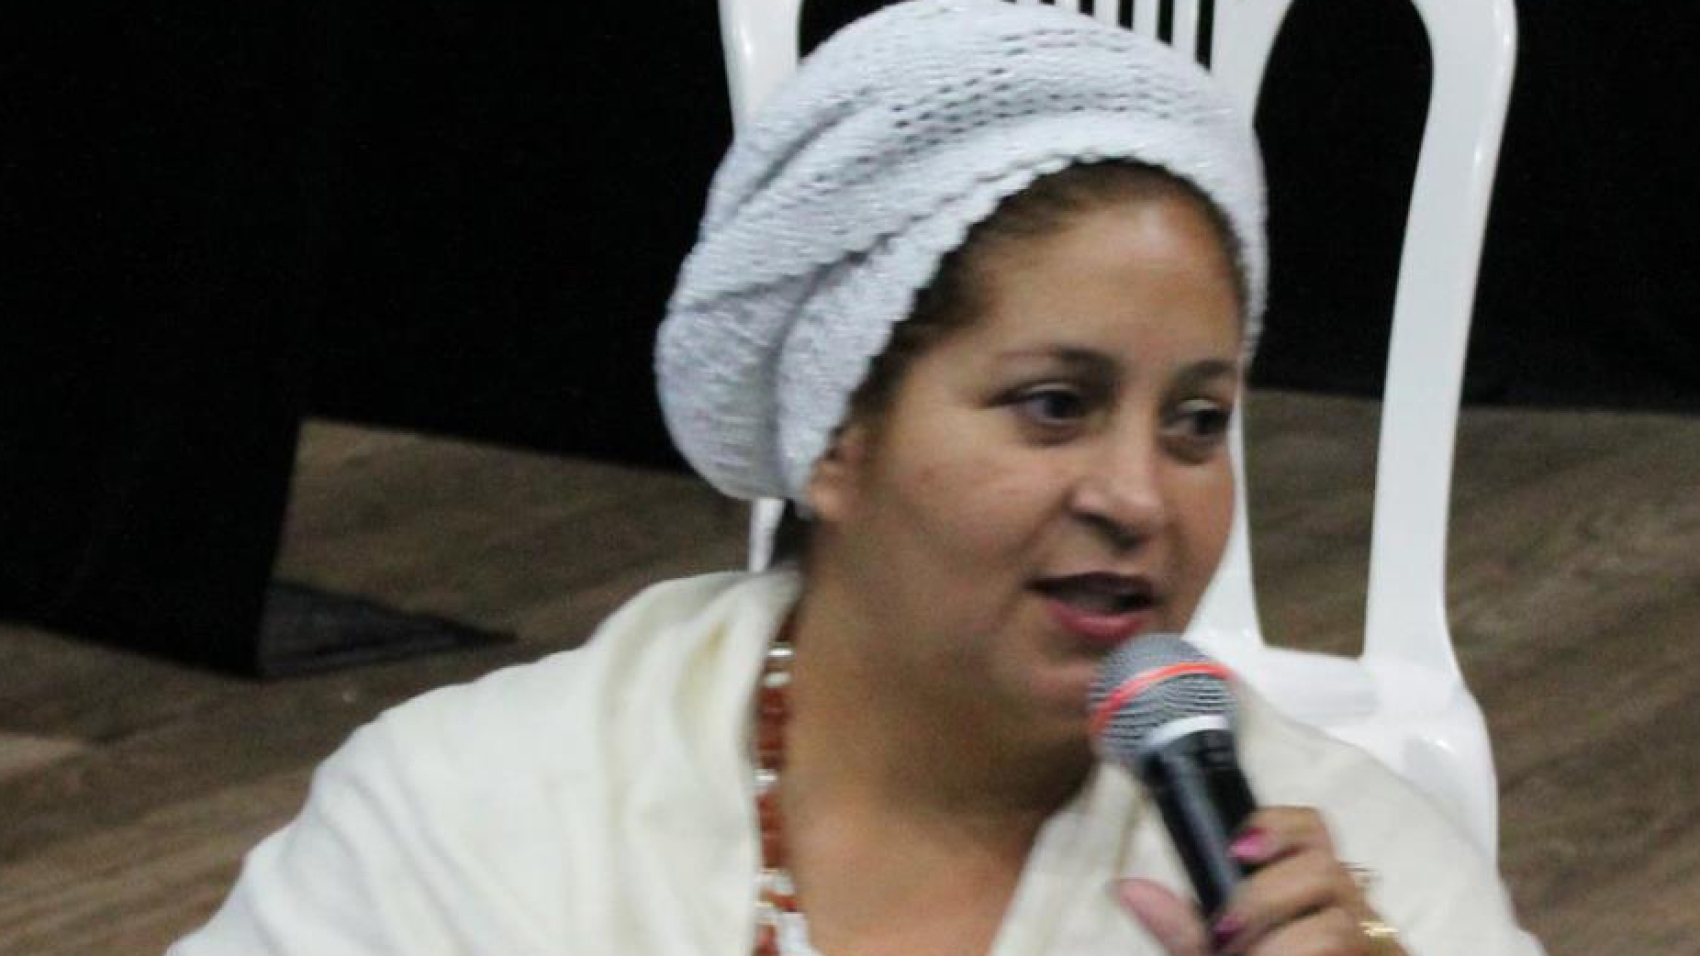 Iyálorixá Cristina d’Osun is the religious leader of the Ilê Asé Iyalode Oyo, Coordinator of the São Paulo Nucleous of RENAFRO and the Coordinator of the Renafro Women of Axé Working Group